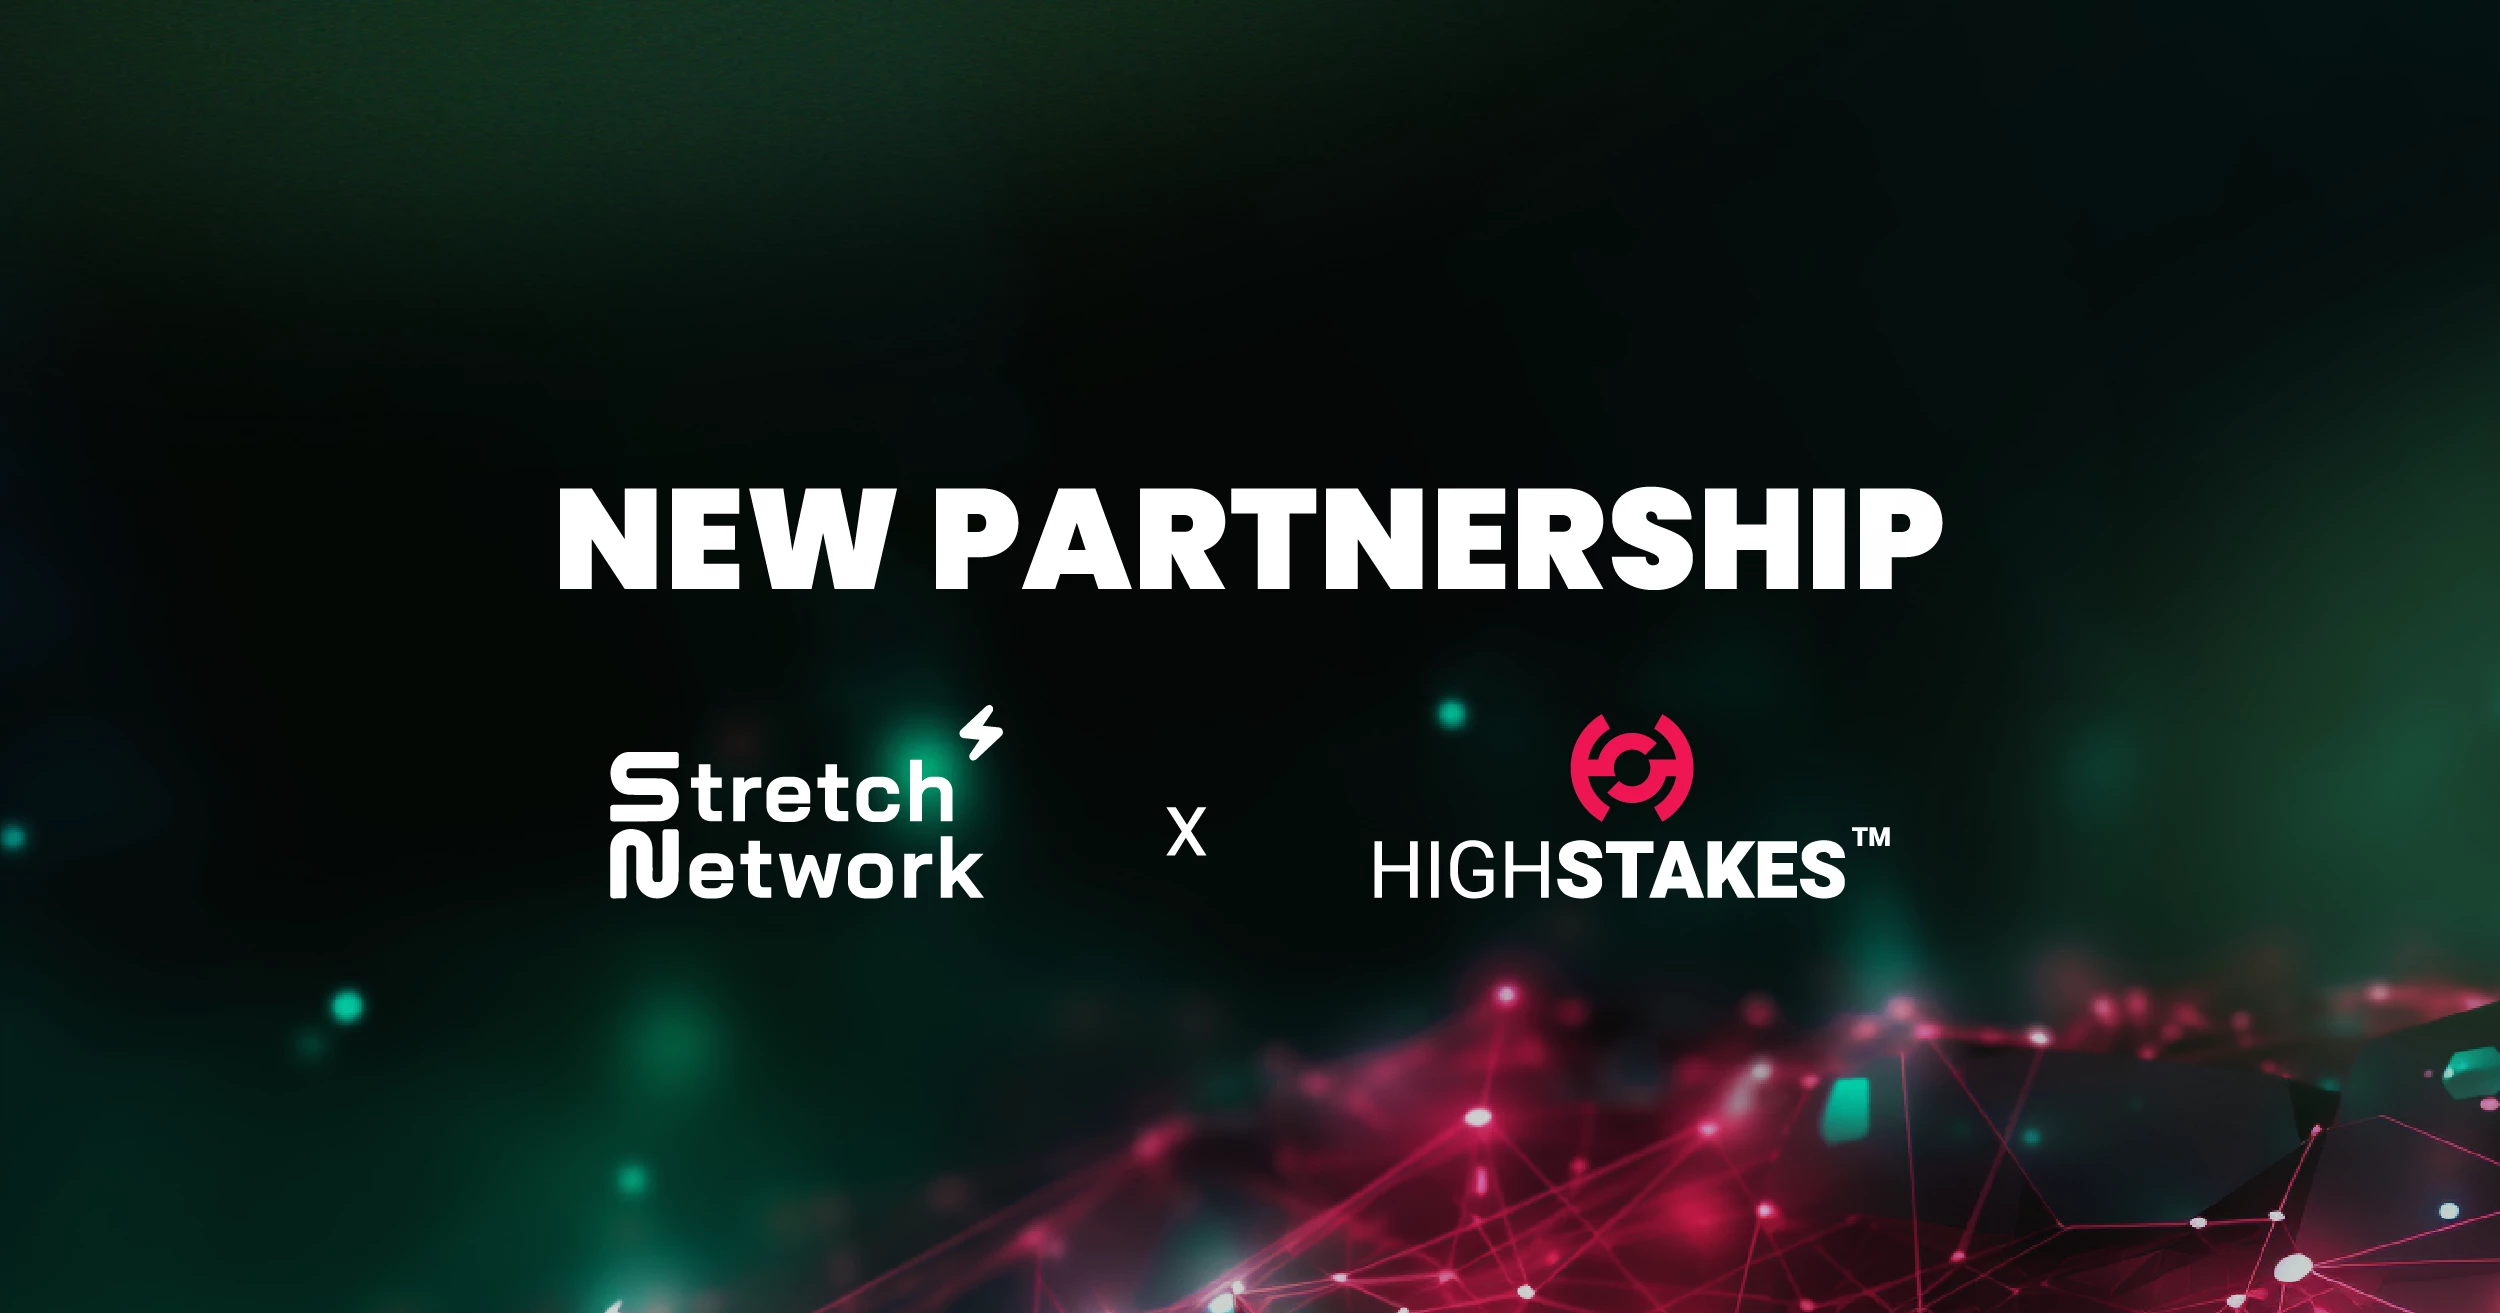 We're going live with HighStakes! 